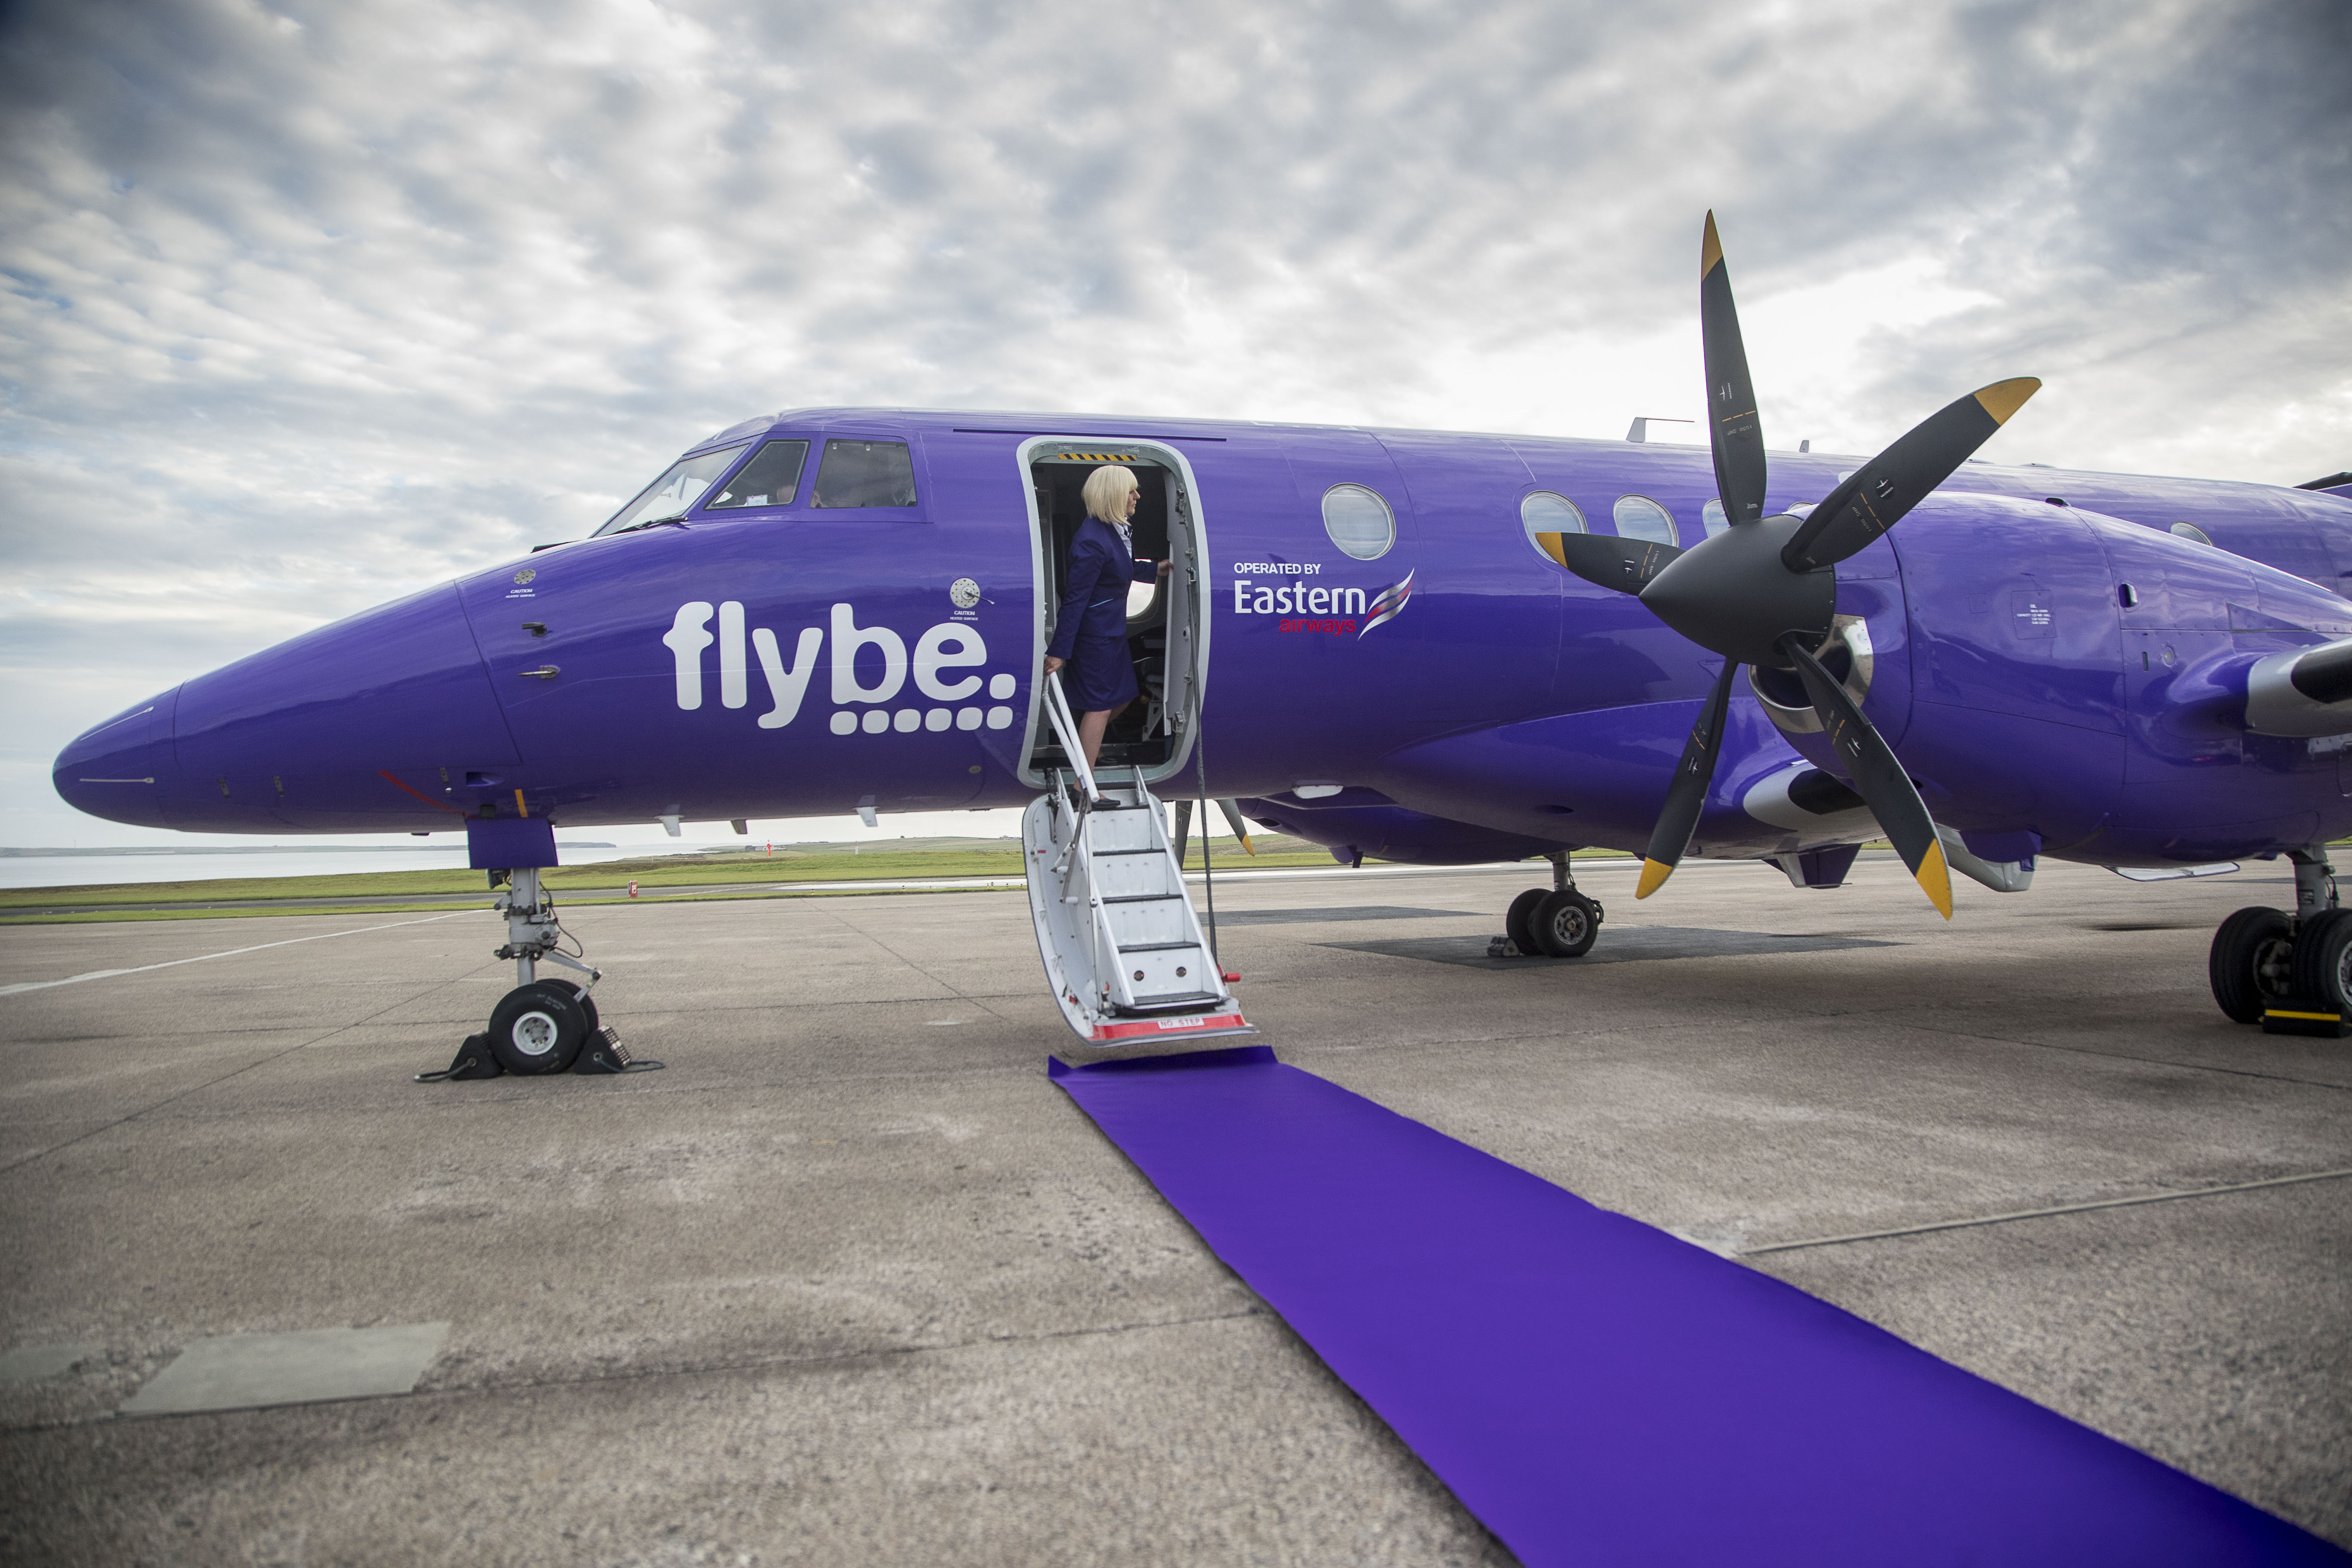 Flybe are the equity partner of Eastern Airways.